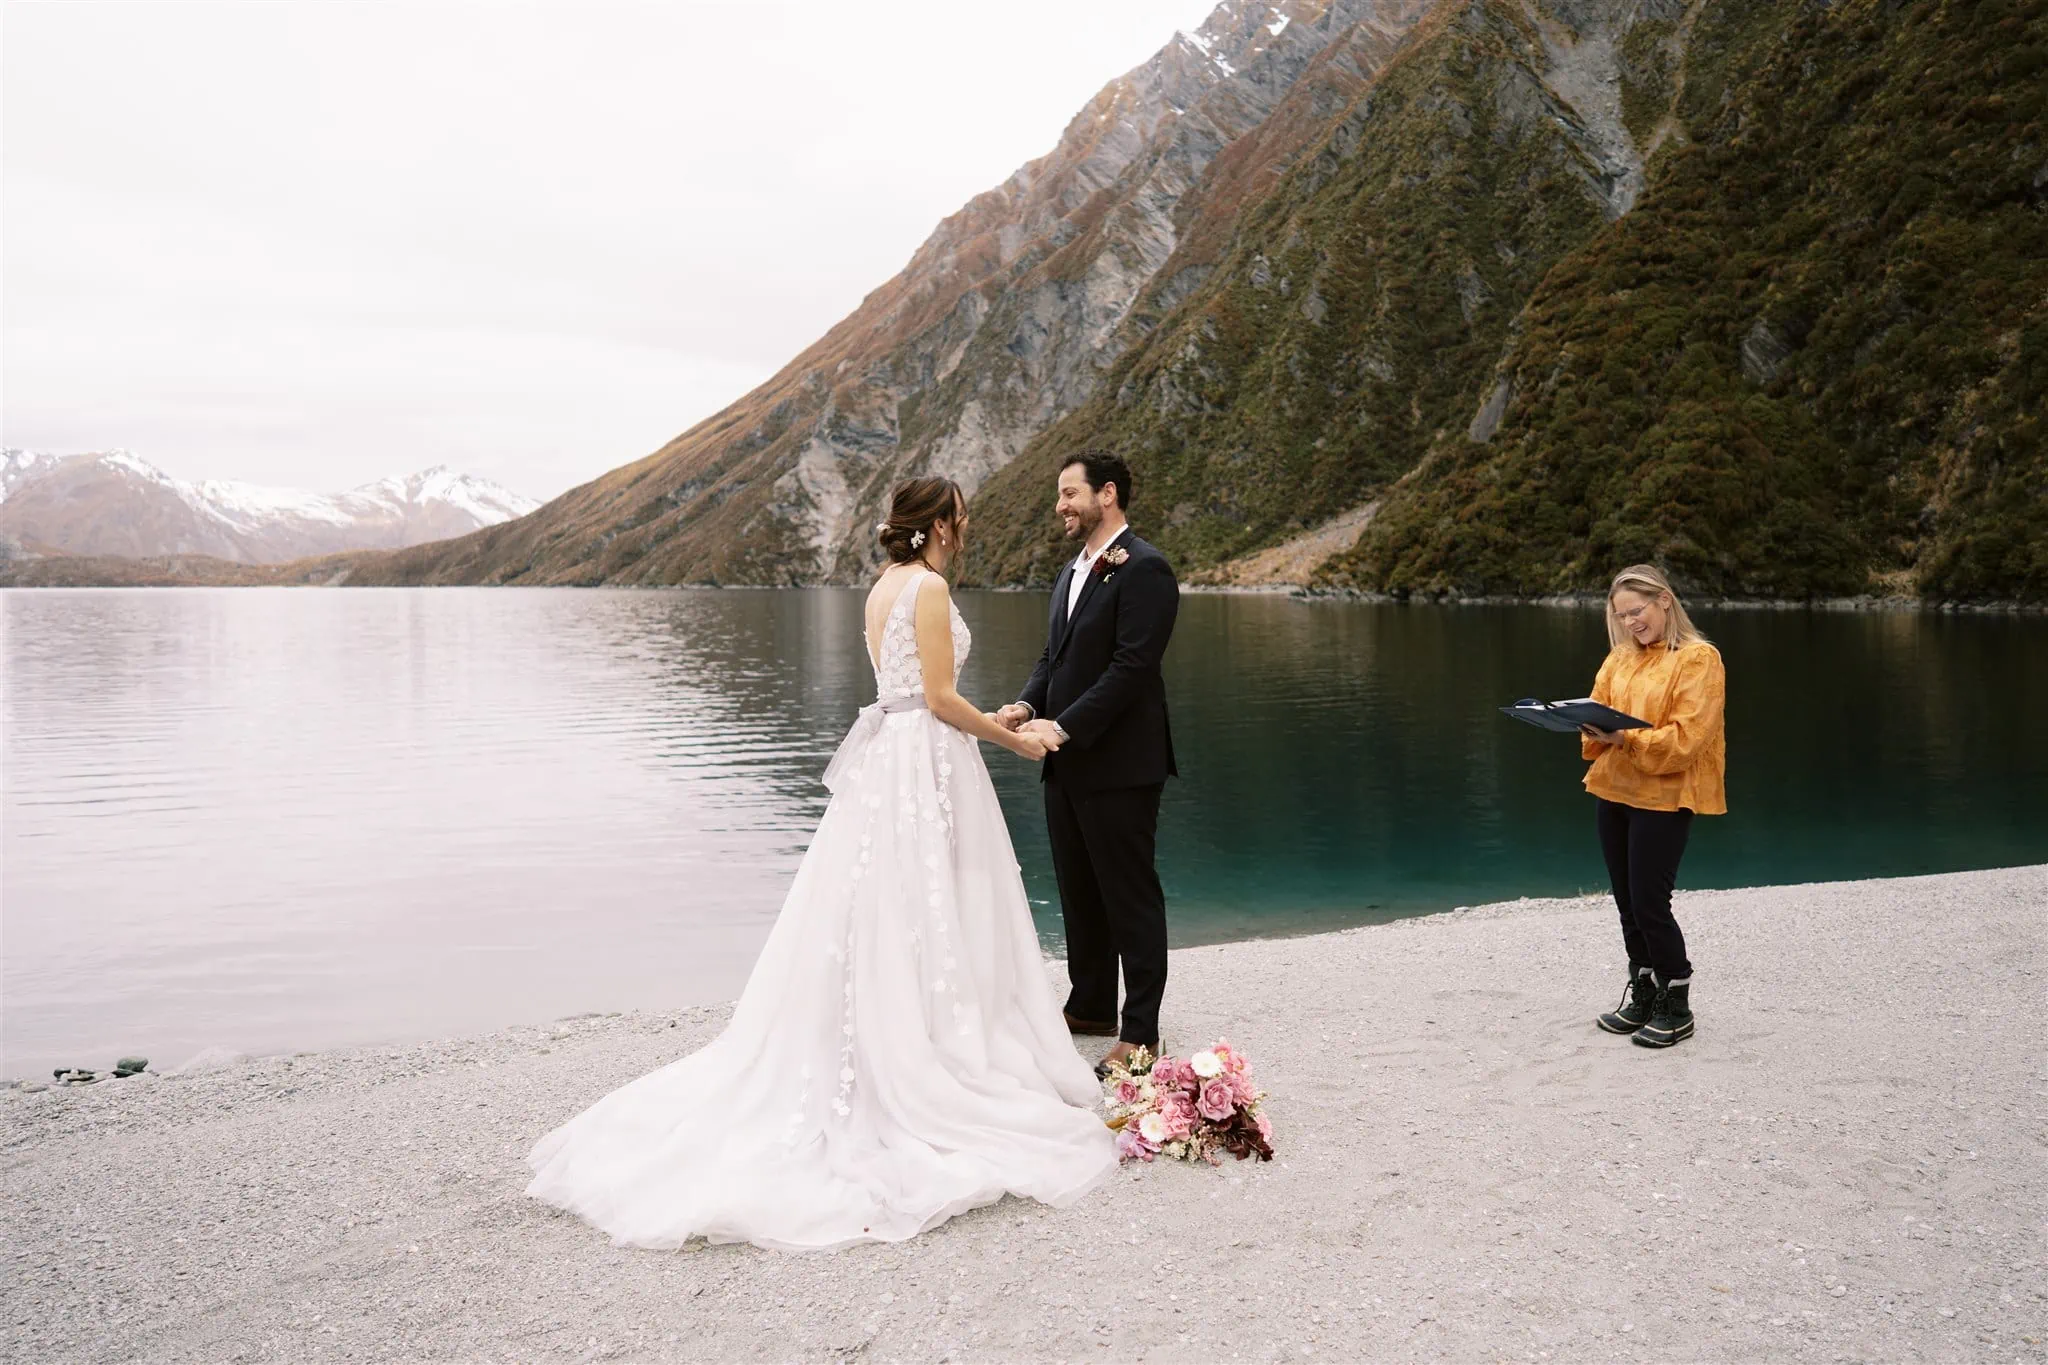 Queenstown New Zealand Elopement Wedding Photographer - Alex & Shahar, a bride and groom enjoying a Stargazing Date on the shore of a lake in Queenstown, New Zealand.